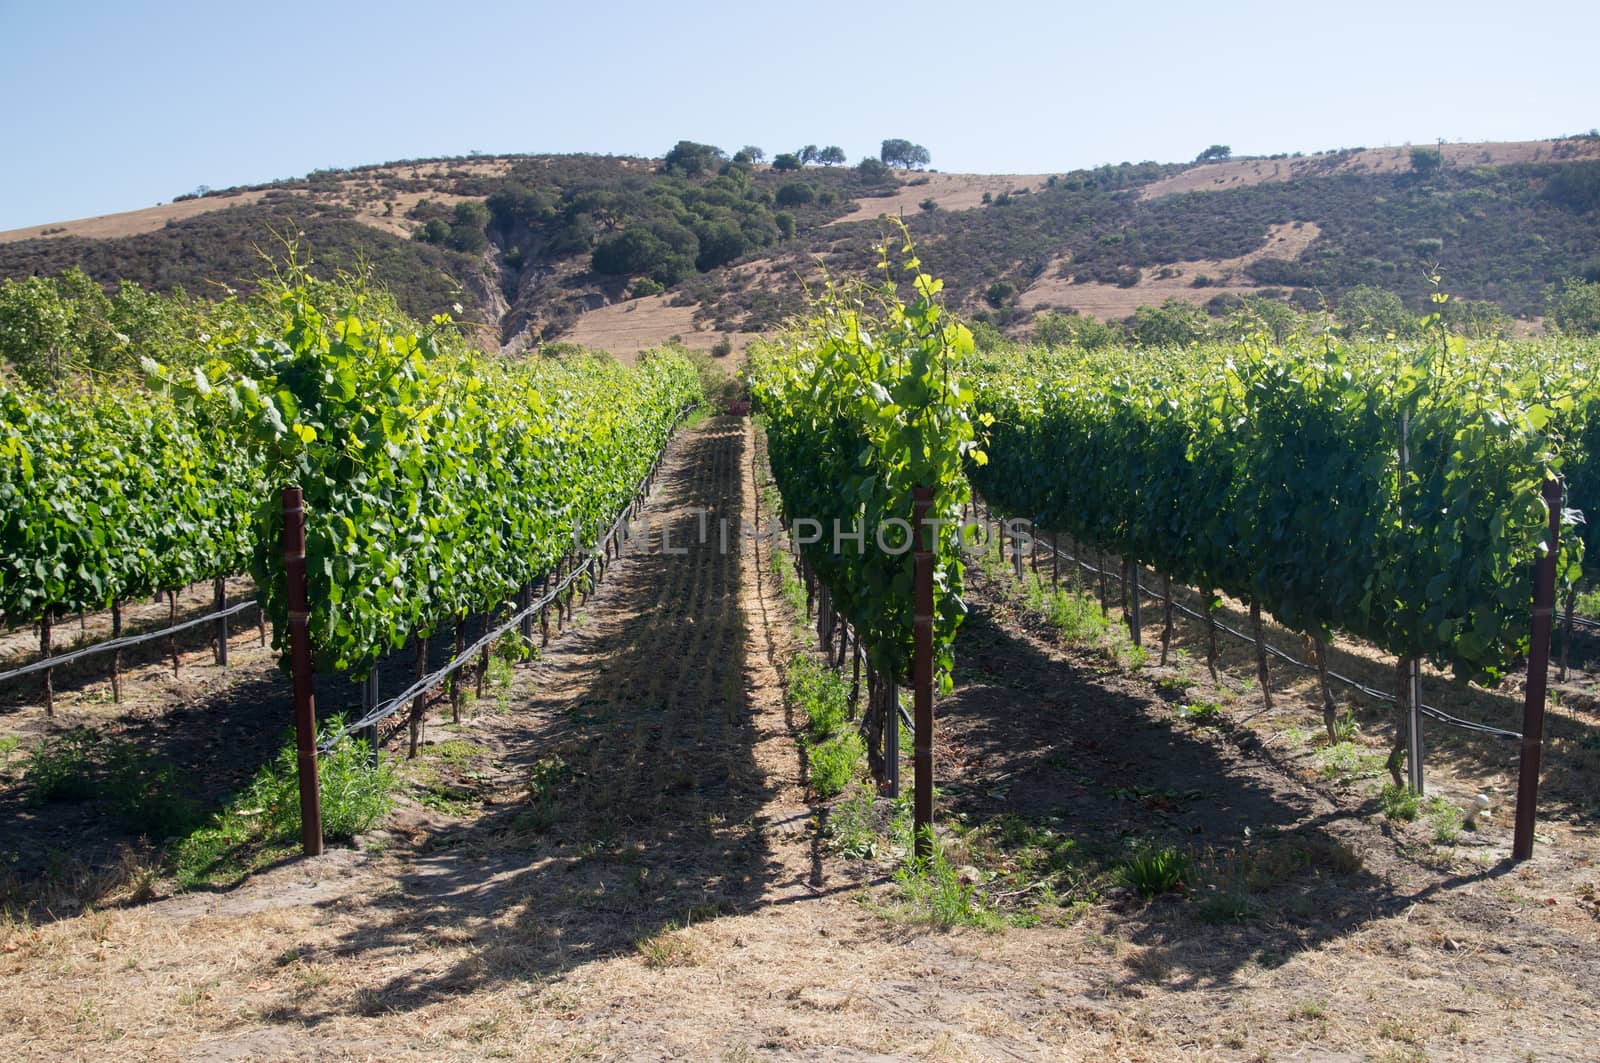 Rows of grapevines in California in Summer